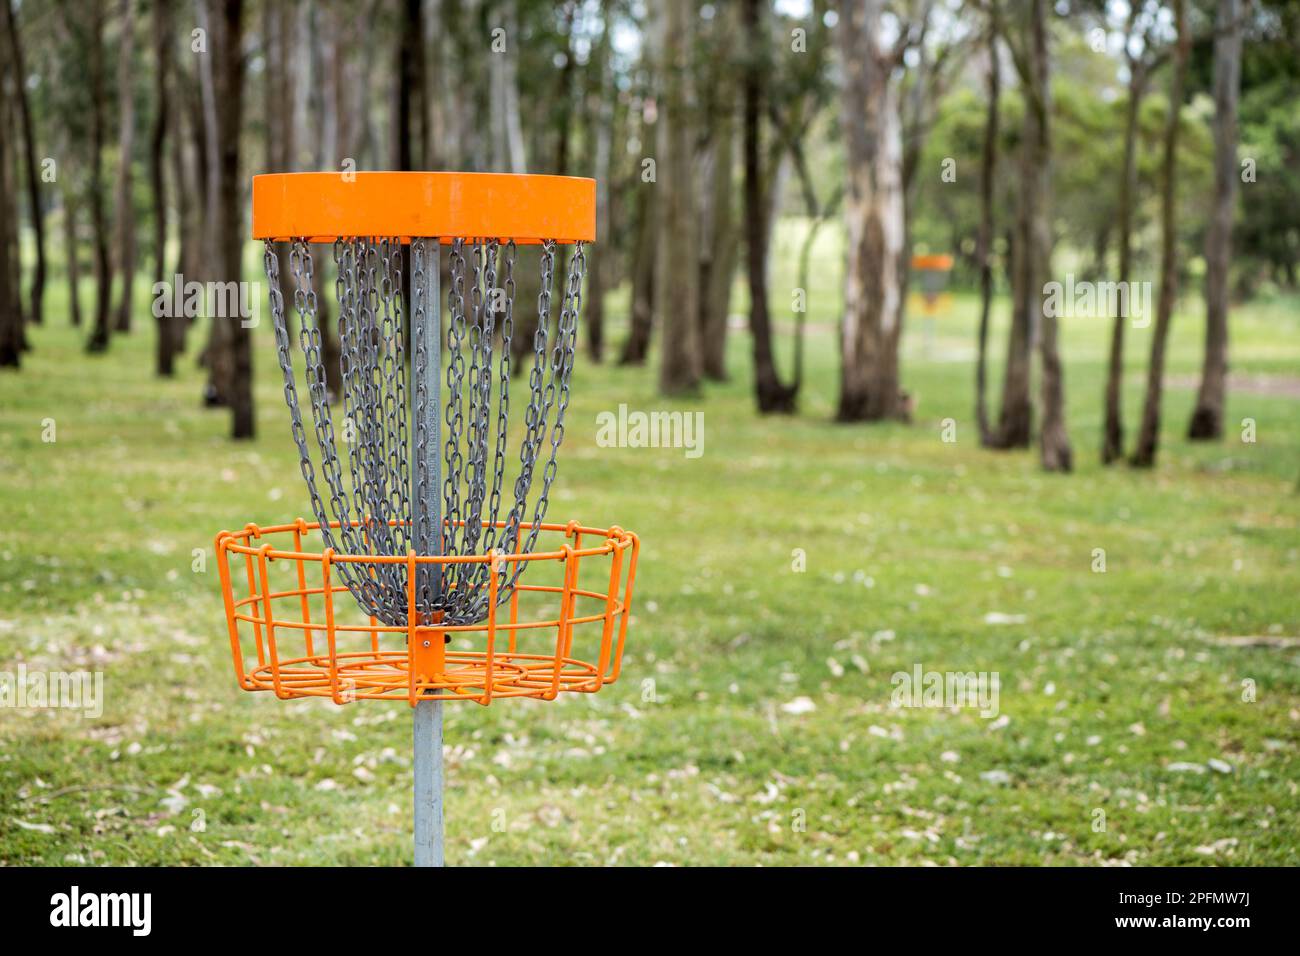 Closeup of disc golf (frolf) basket in a park obstacle course with a shallow depth of field Stock Photo